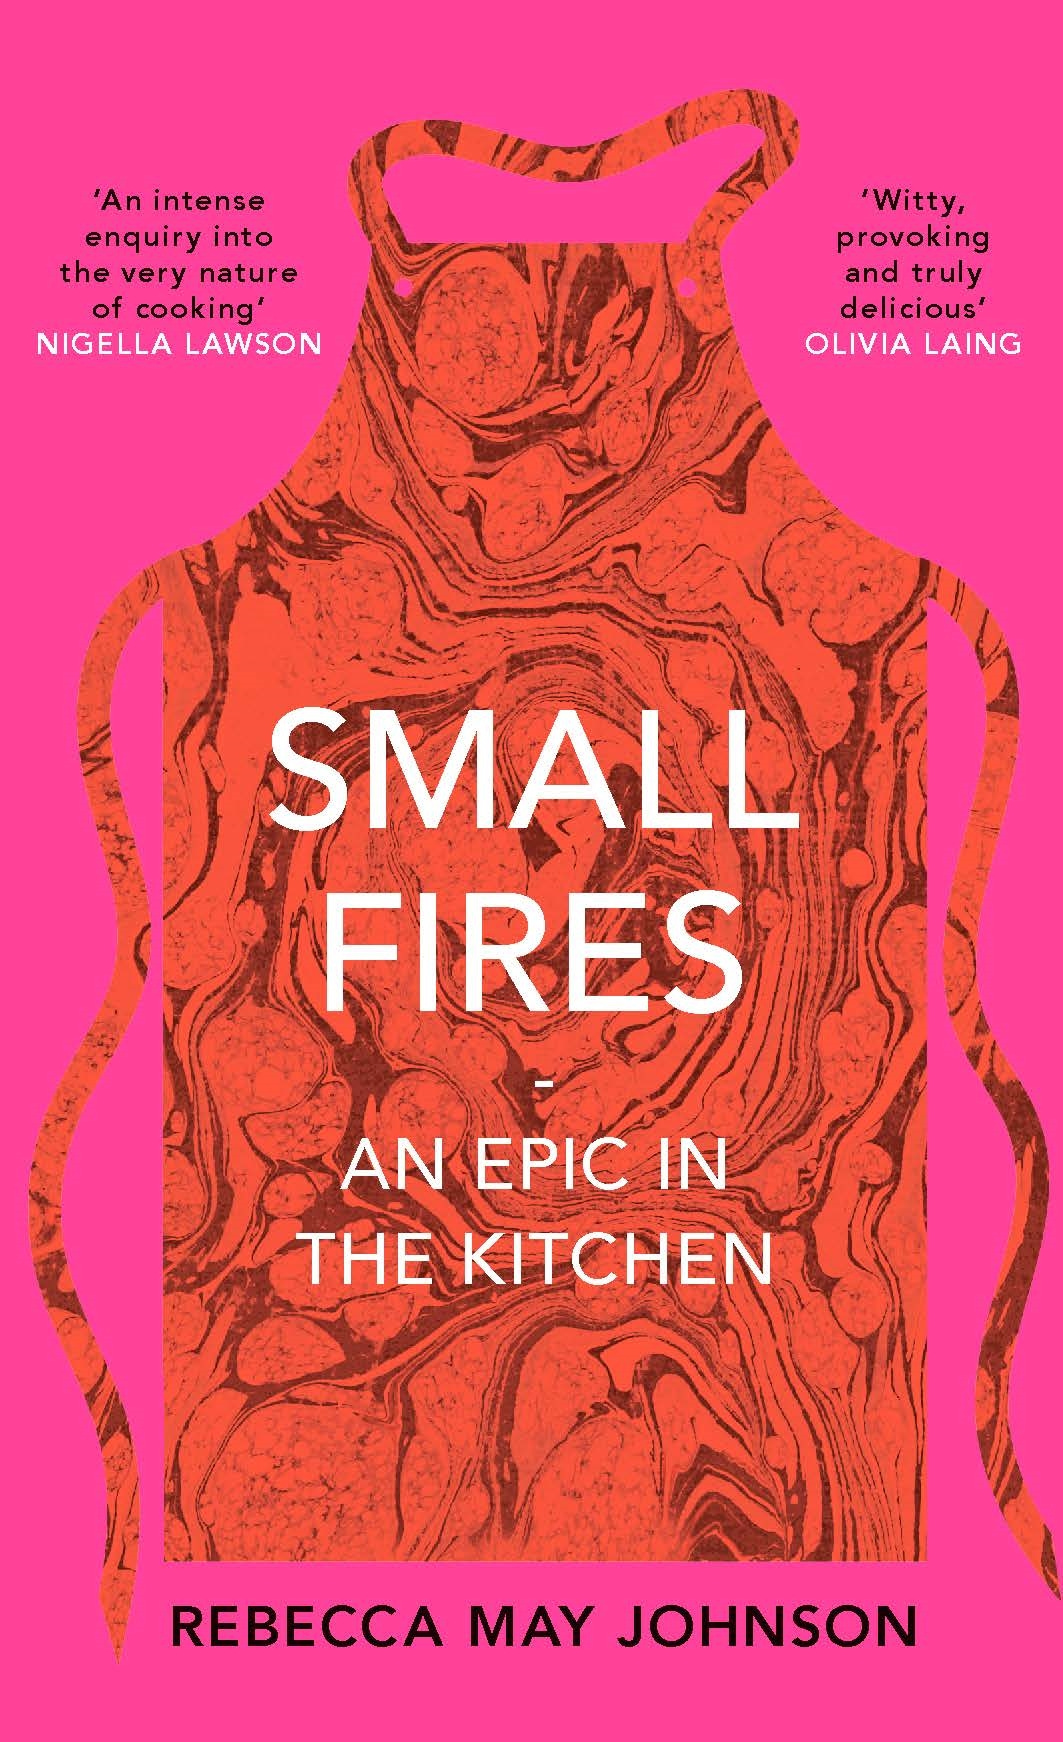 Small Fires - An Epic in the Kitchen by Rebecca May Johnson | 9781911590484  | Pushkin Press